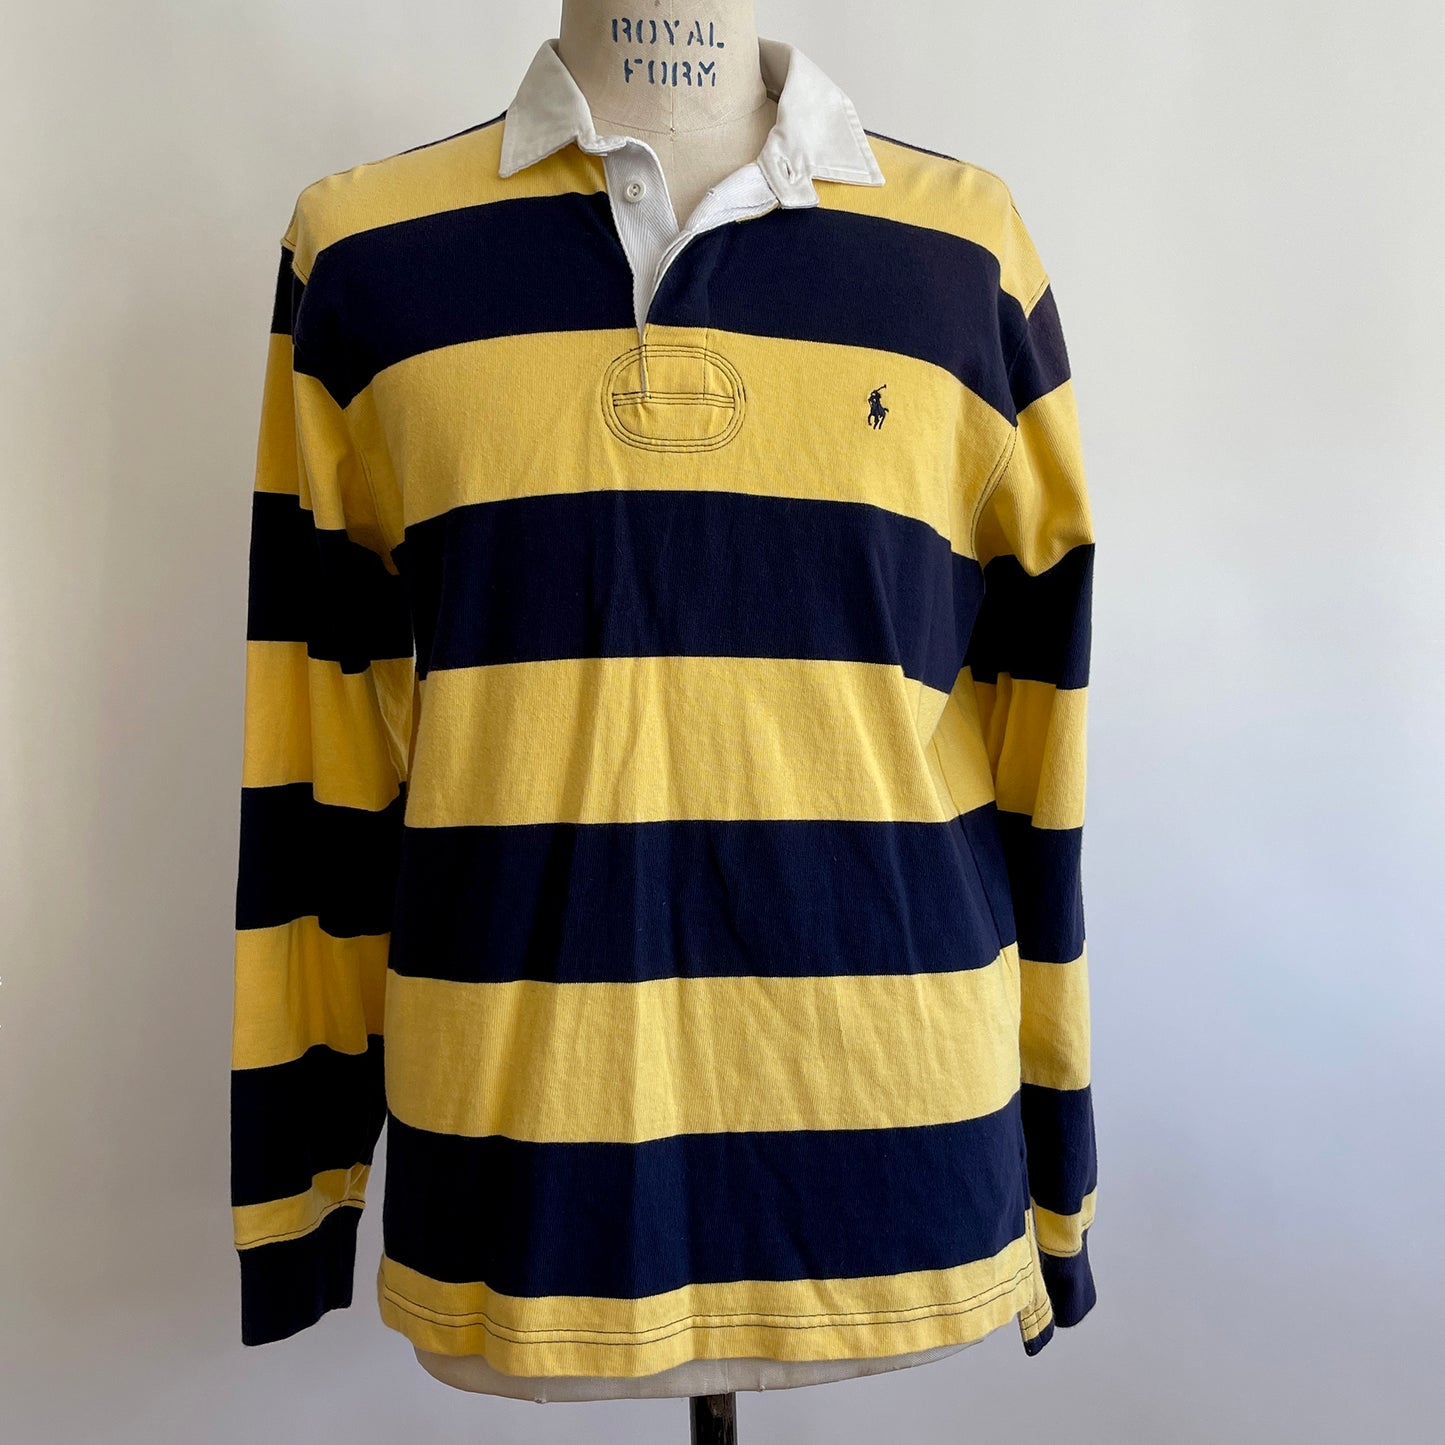 Vintage Navy and Gold Rugby shirt